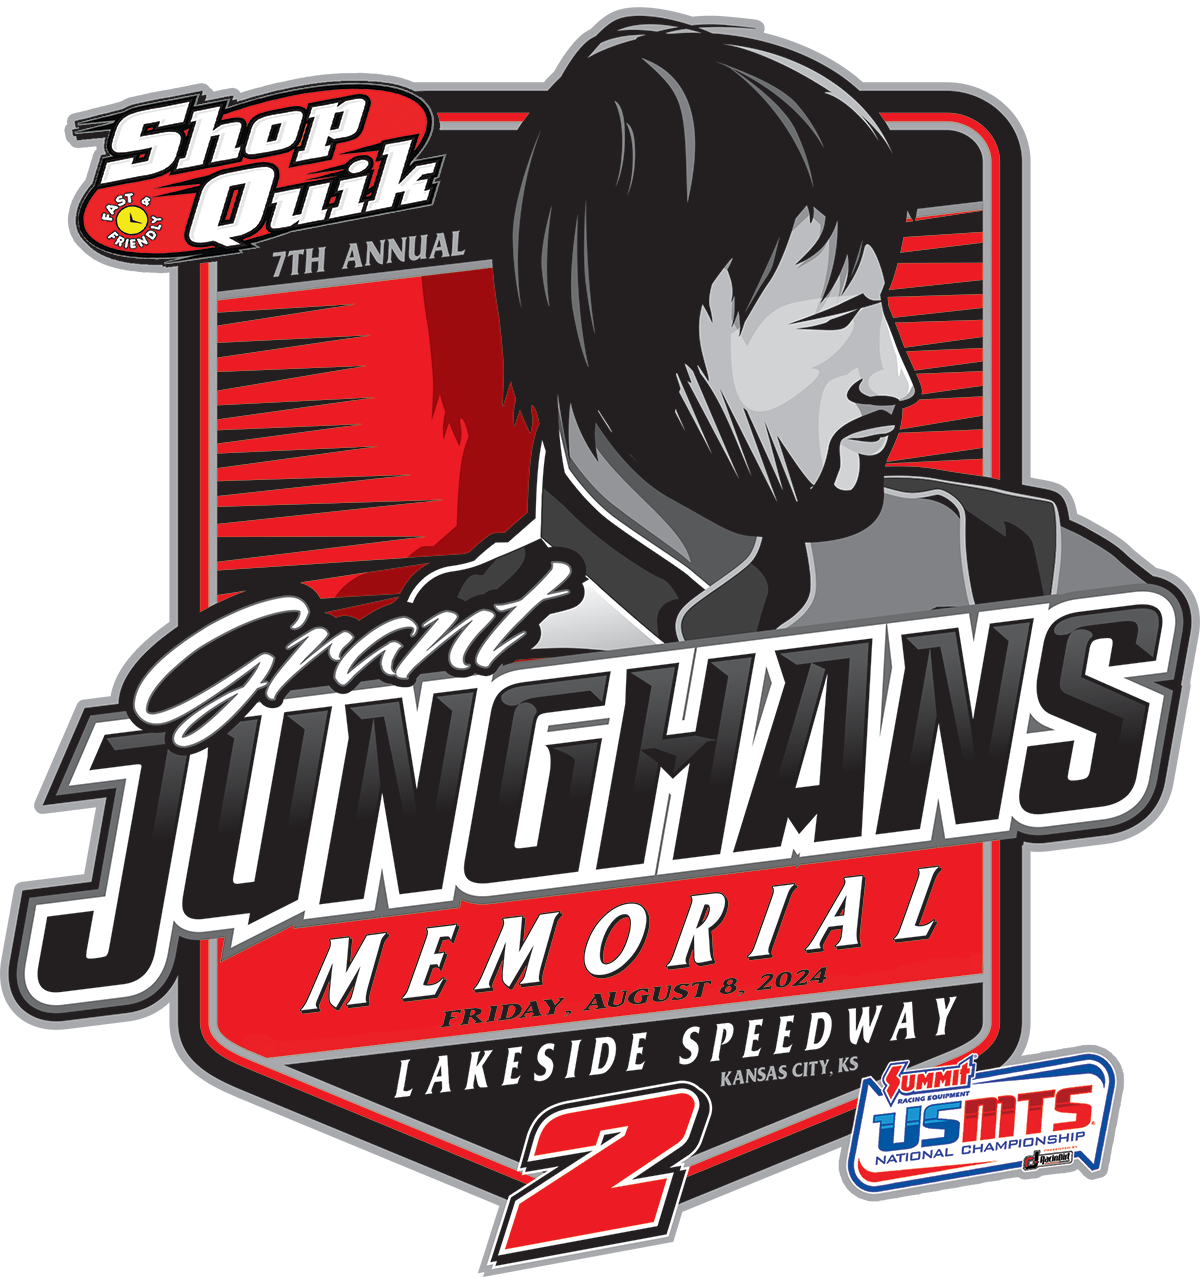 7th Annual USMTS Grant Junghans Memorial presented by Shop Quik